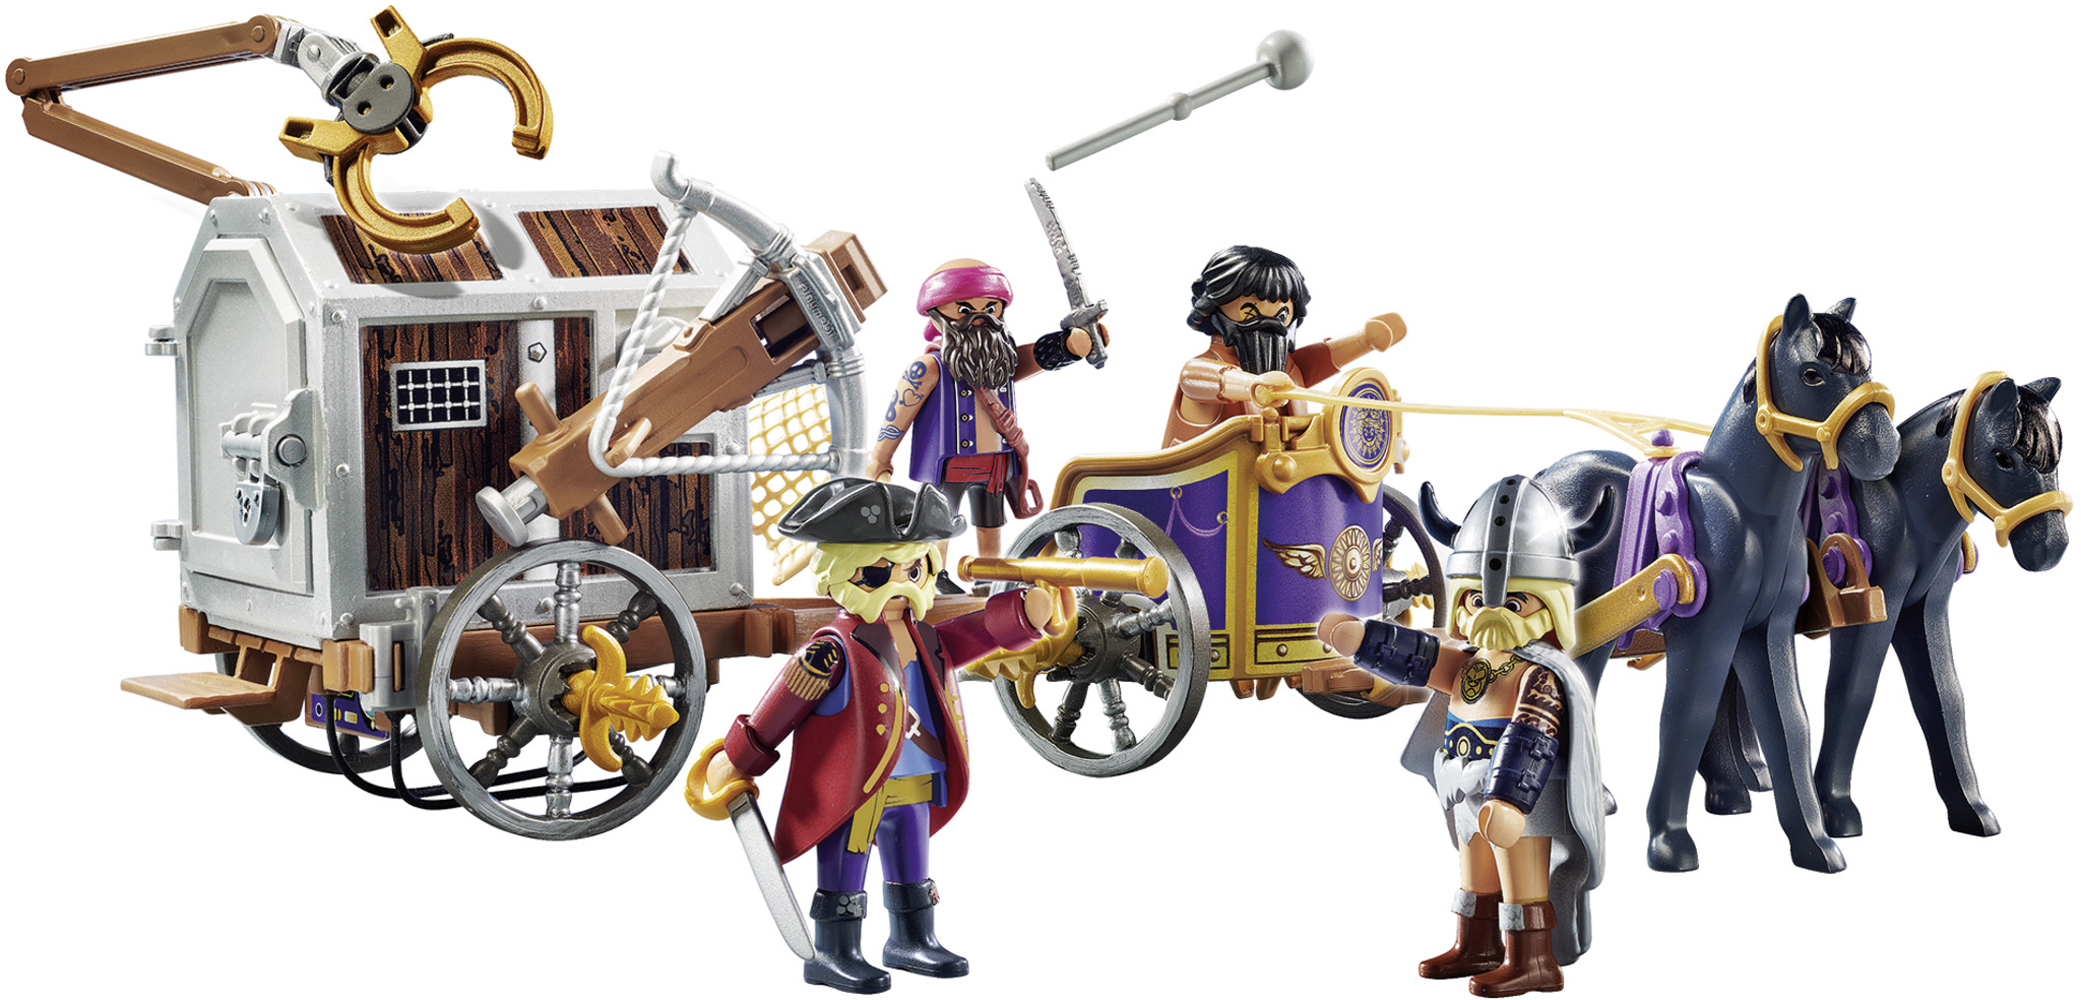 PLAYMOBIL THE MOVIE Charlie with Prison Wagon - image 1 of 7